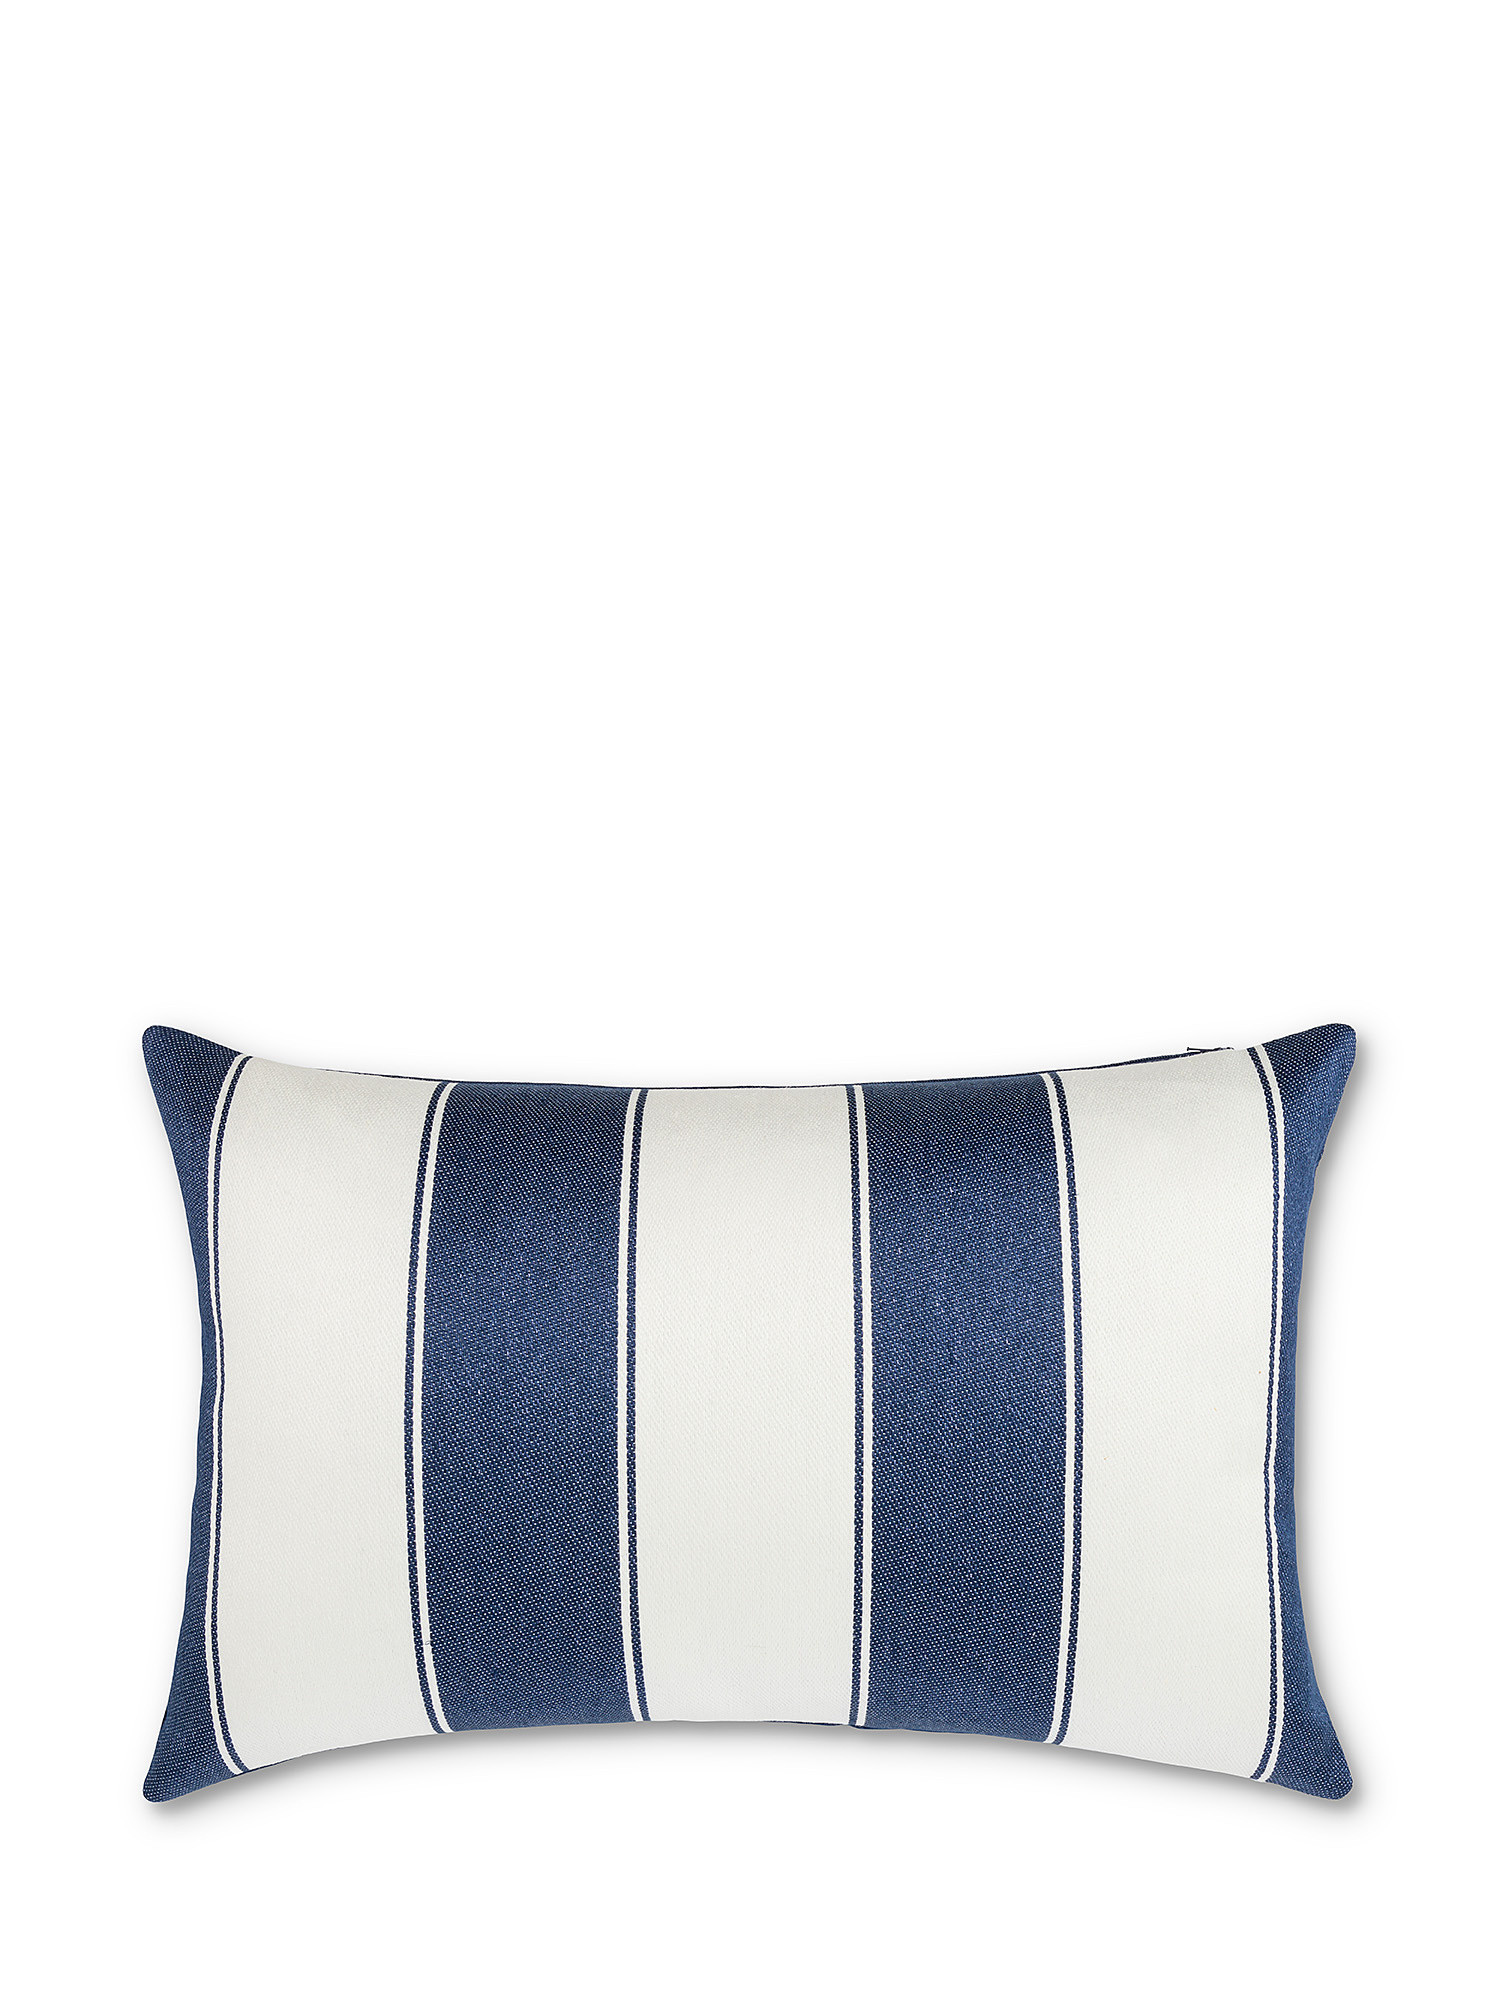 Striped pattern fabric cushion 35x55cm, Blue, large image number 0